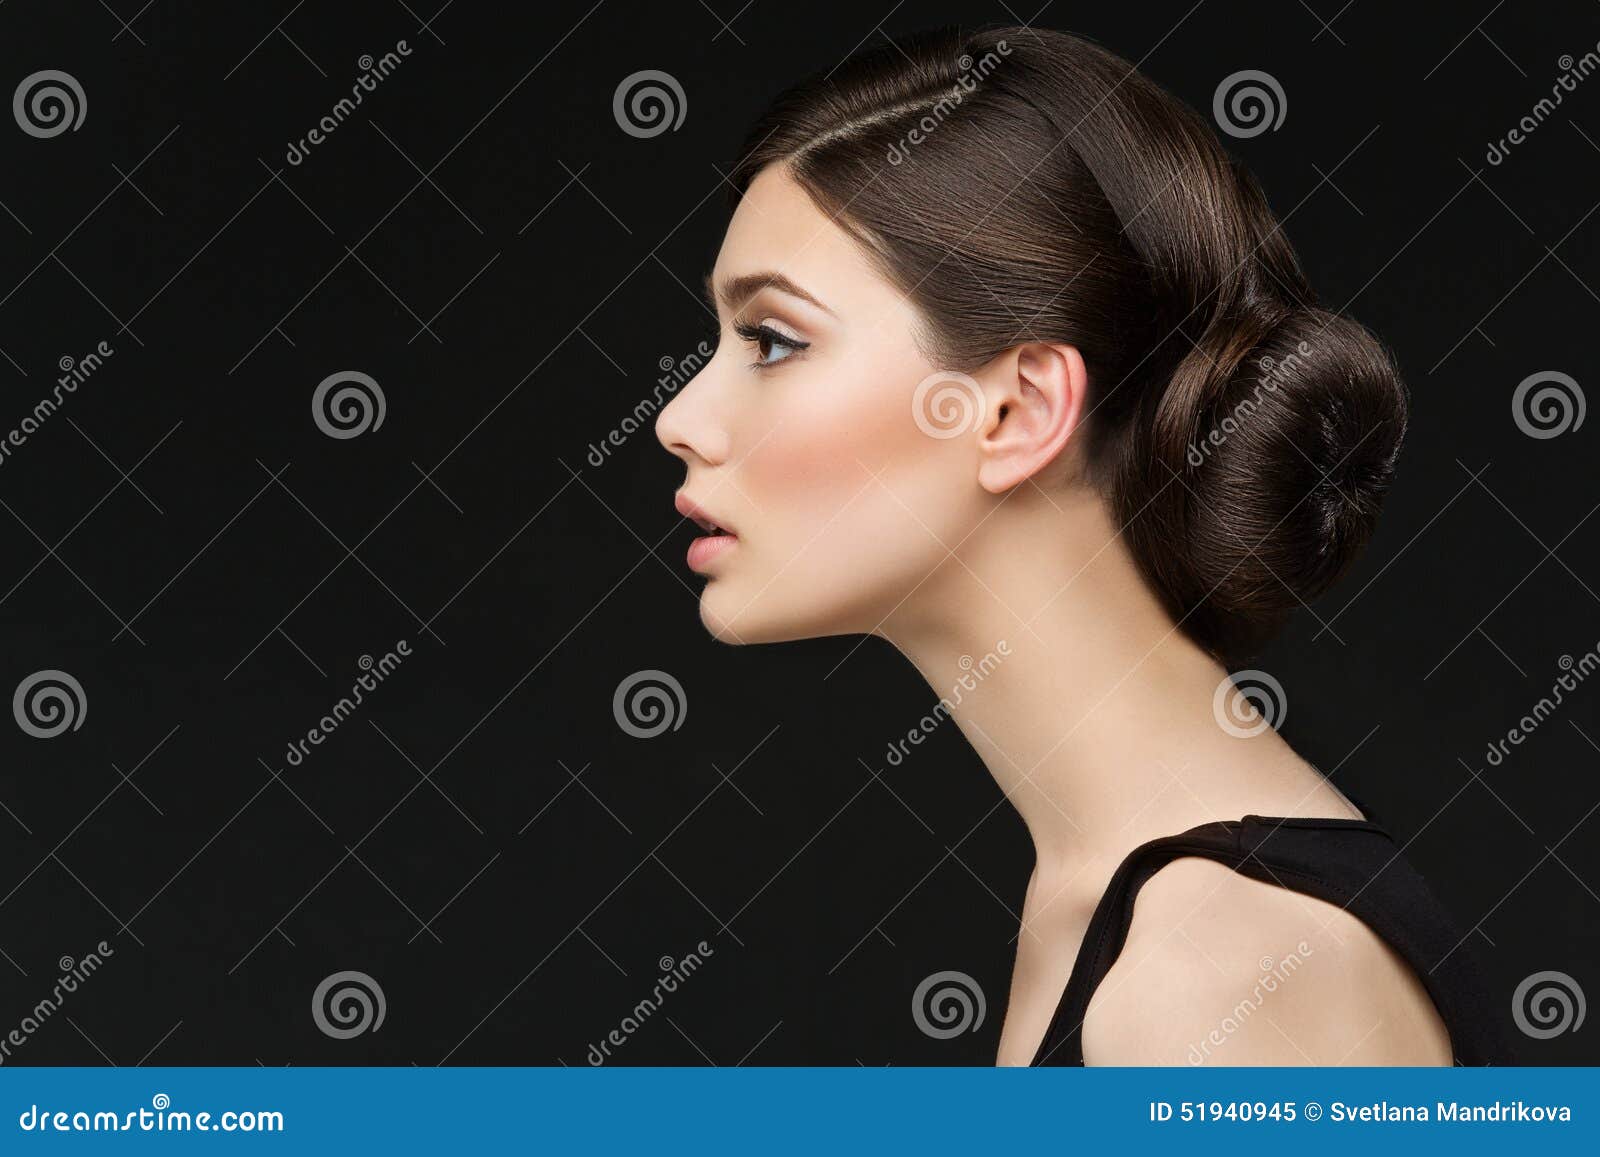 Girl With Long Neck Stock Image Image Of Elegance Beauty 51940945